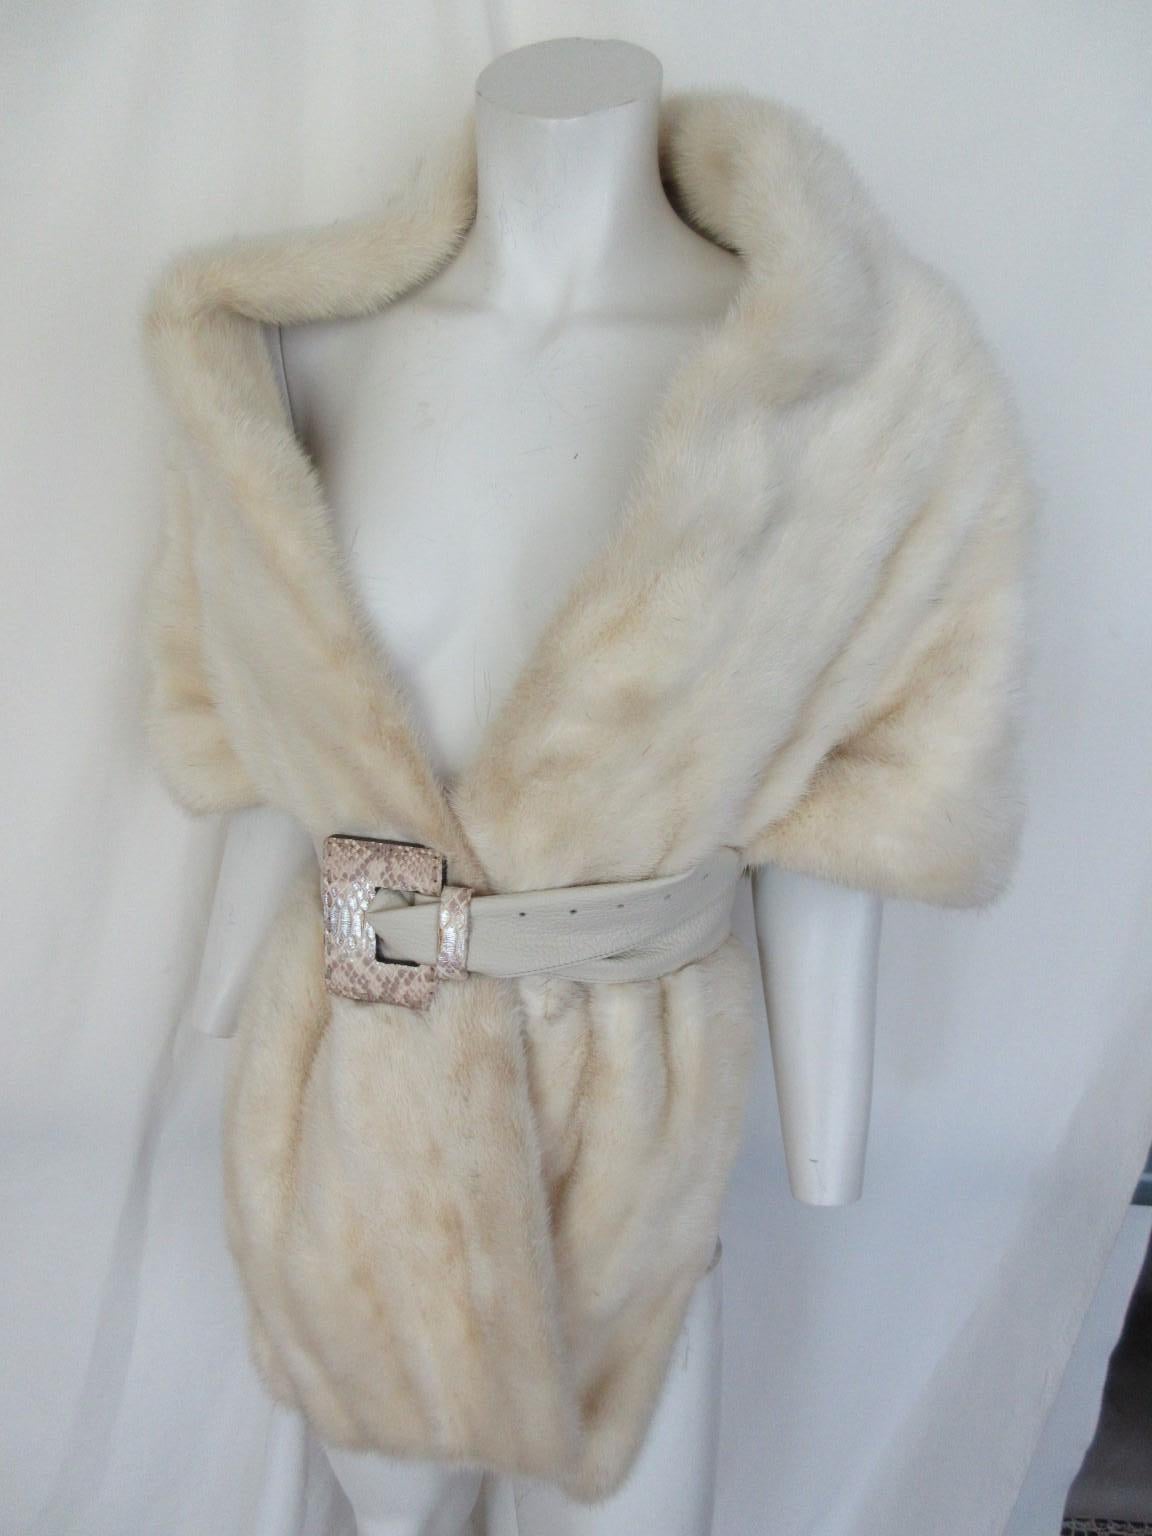 Beautiful vintage stole cape made of soft naturel ivory mink fur .

We offer more luxury fur products, view our frontstore.

Details:
Silk lined
aproxx 200 cm/ 78.74 inch x 40 cm/ 15.74  inch
Nice to wear for marriage, party or on jeans.
In pre